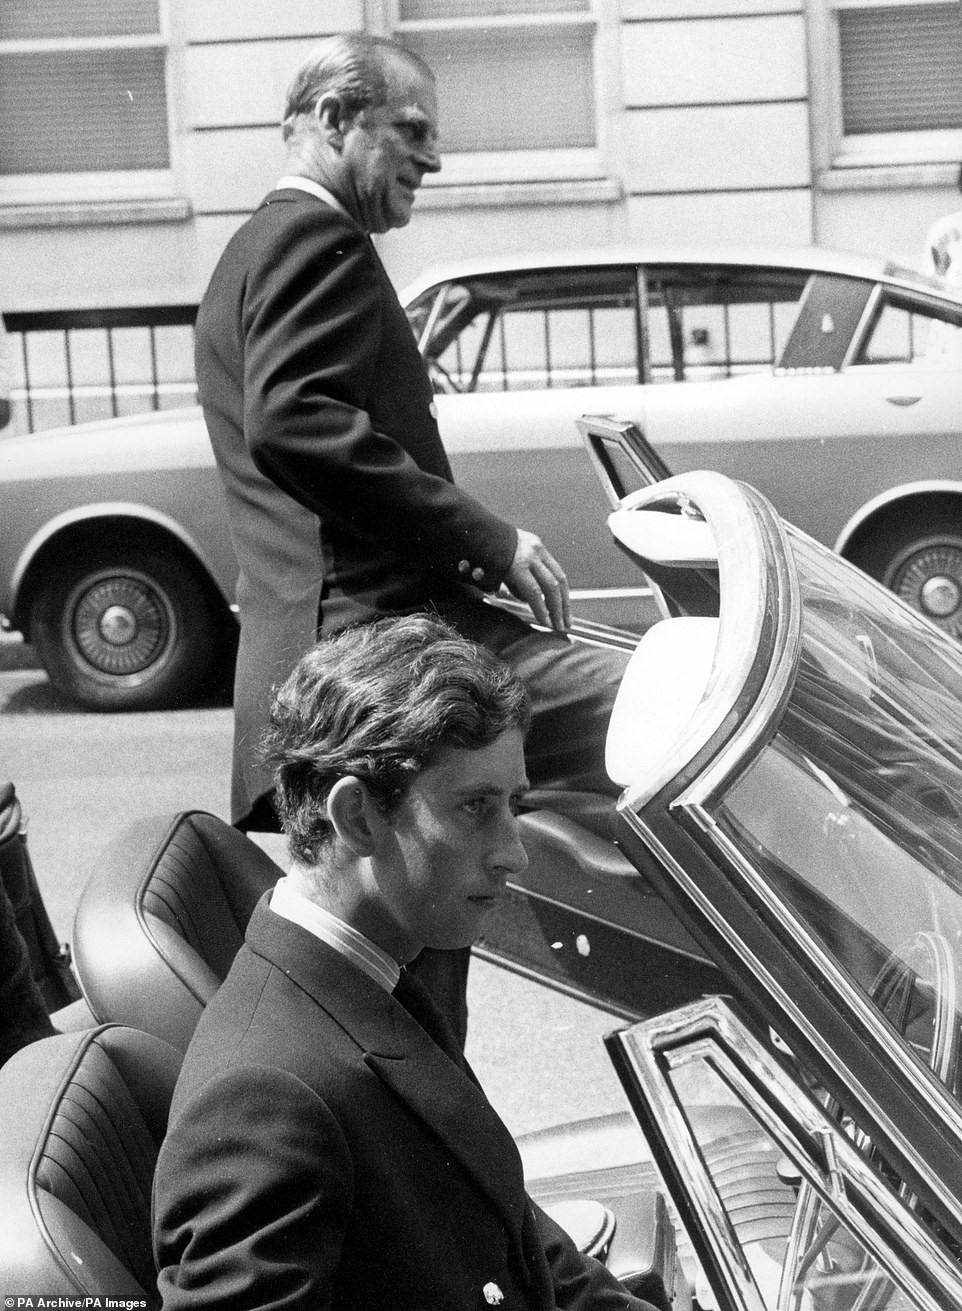 The Duke of Edinburgh about to get into an Aston Martin car, driven by the Prince of Wales, outside King Edward VII Hospital for Officers in Beaumont Street, London. The Royal father and son had visited Princess Anne, a patent at the hospital.